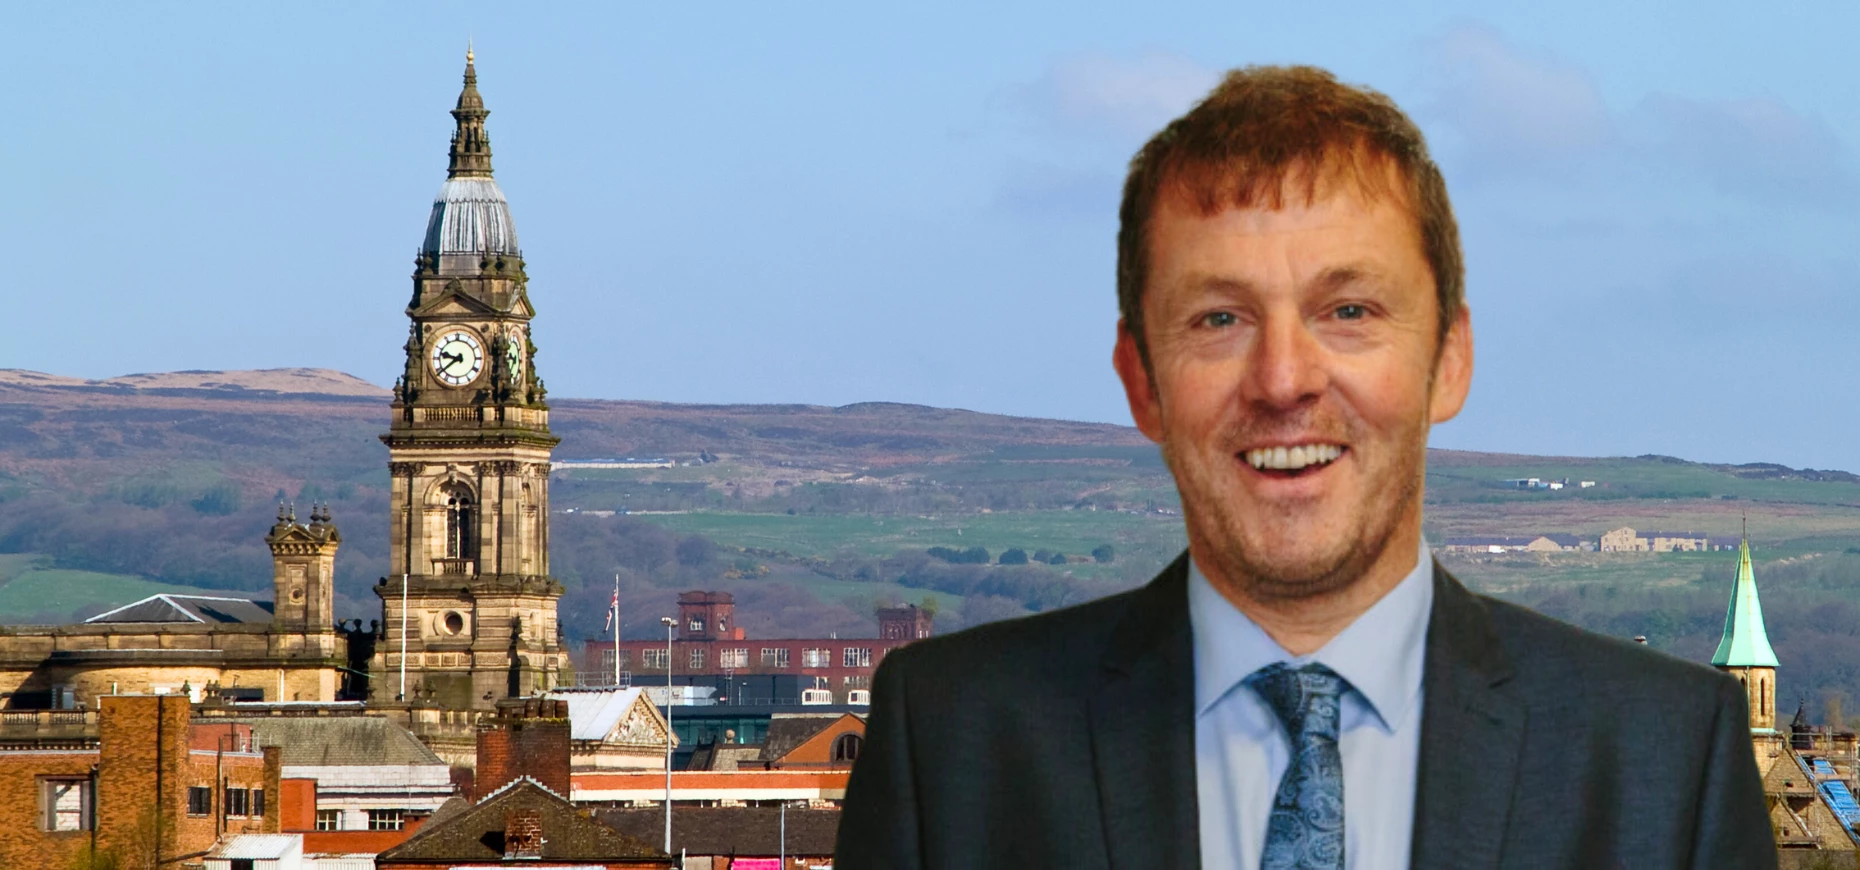 Jonathan Nelson, fund manager at Rosebud, pictured against the Lancashire skyline.